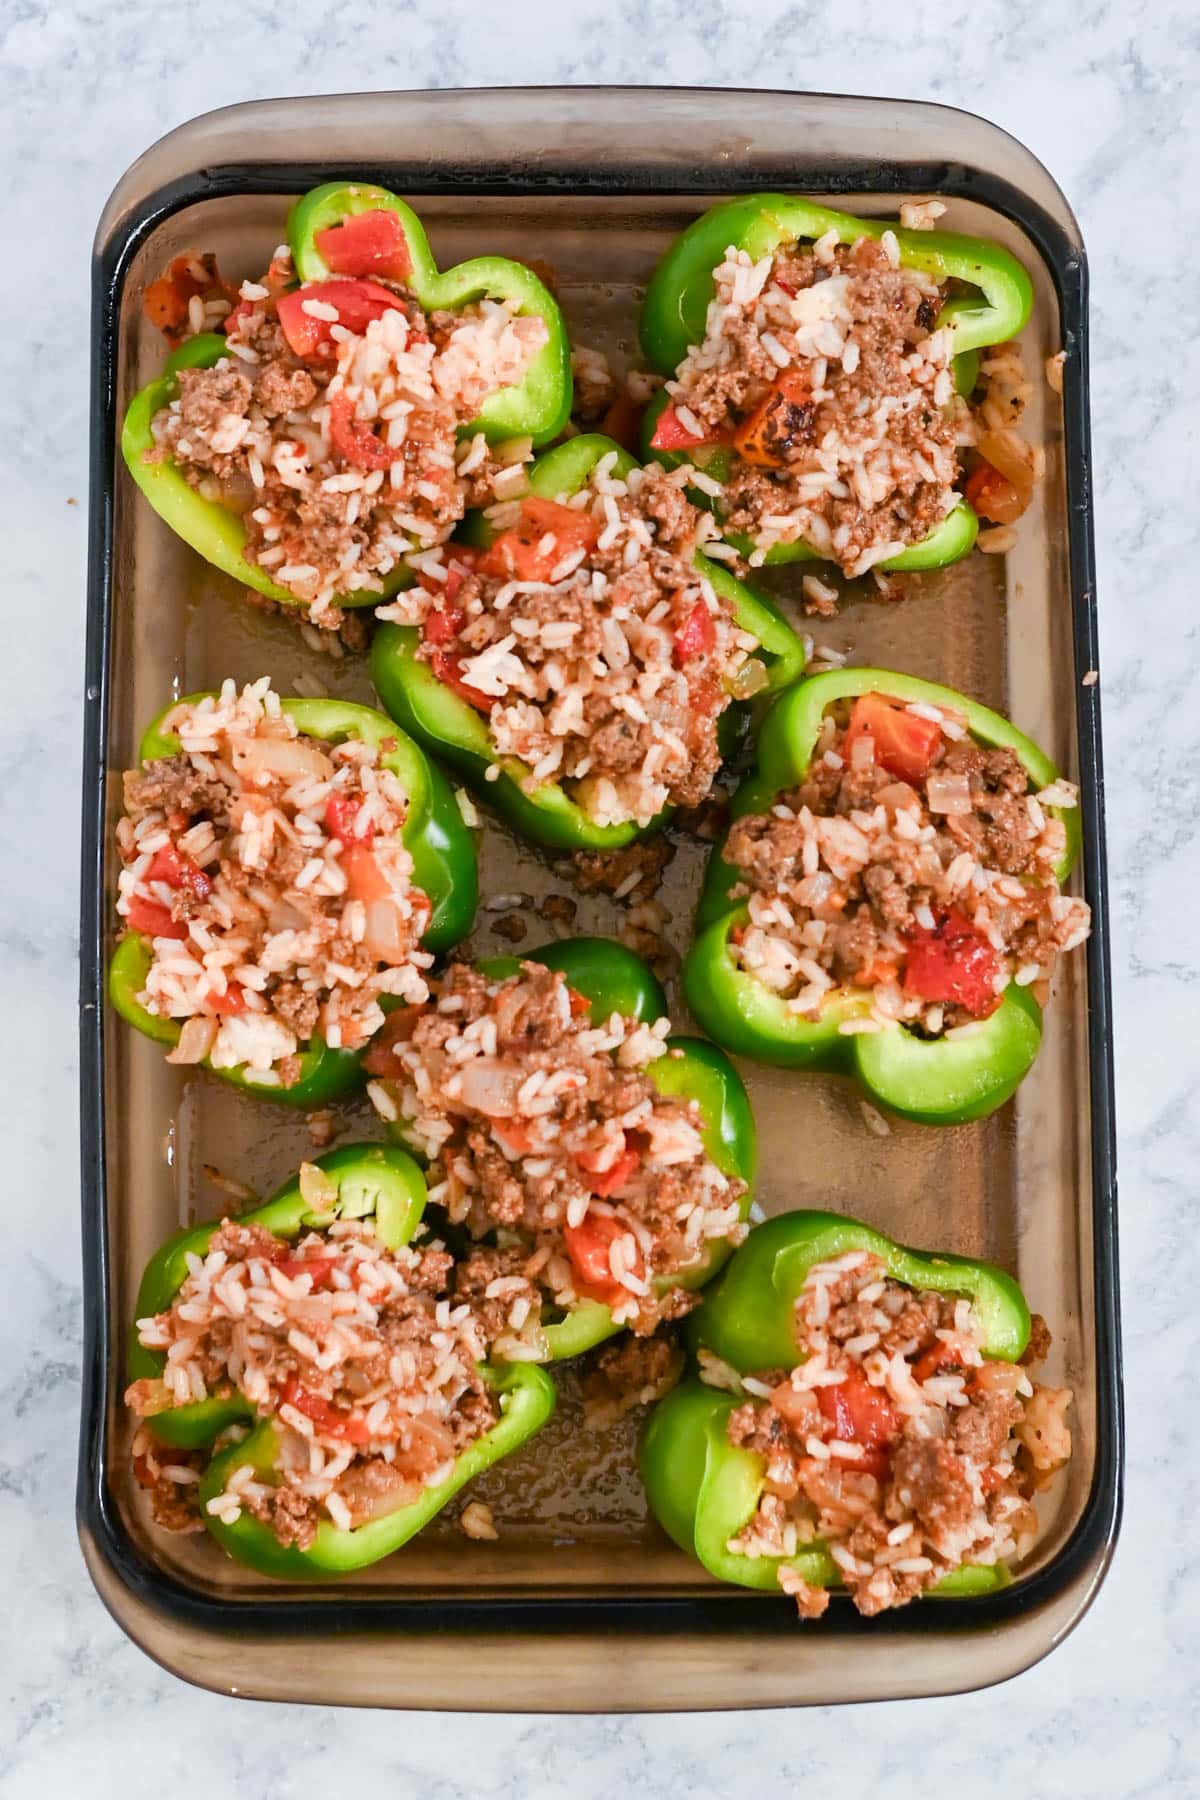 A dish of green bell peppers stuffed with rice, ground meat, and tomatoes, ready to be baked.